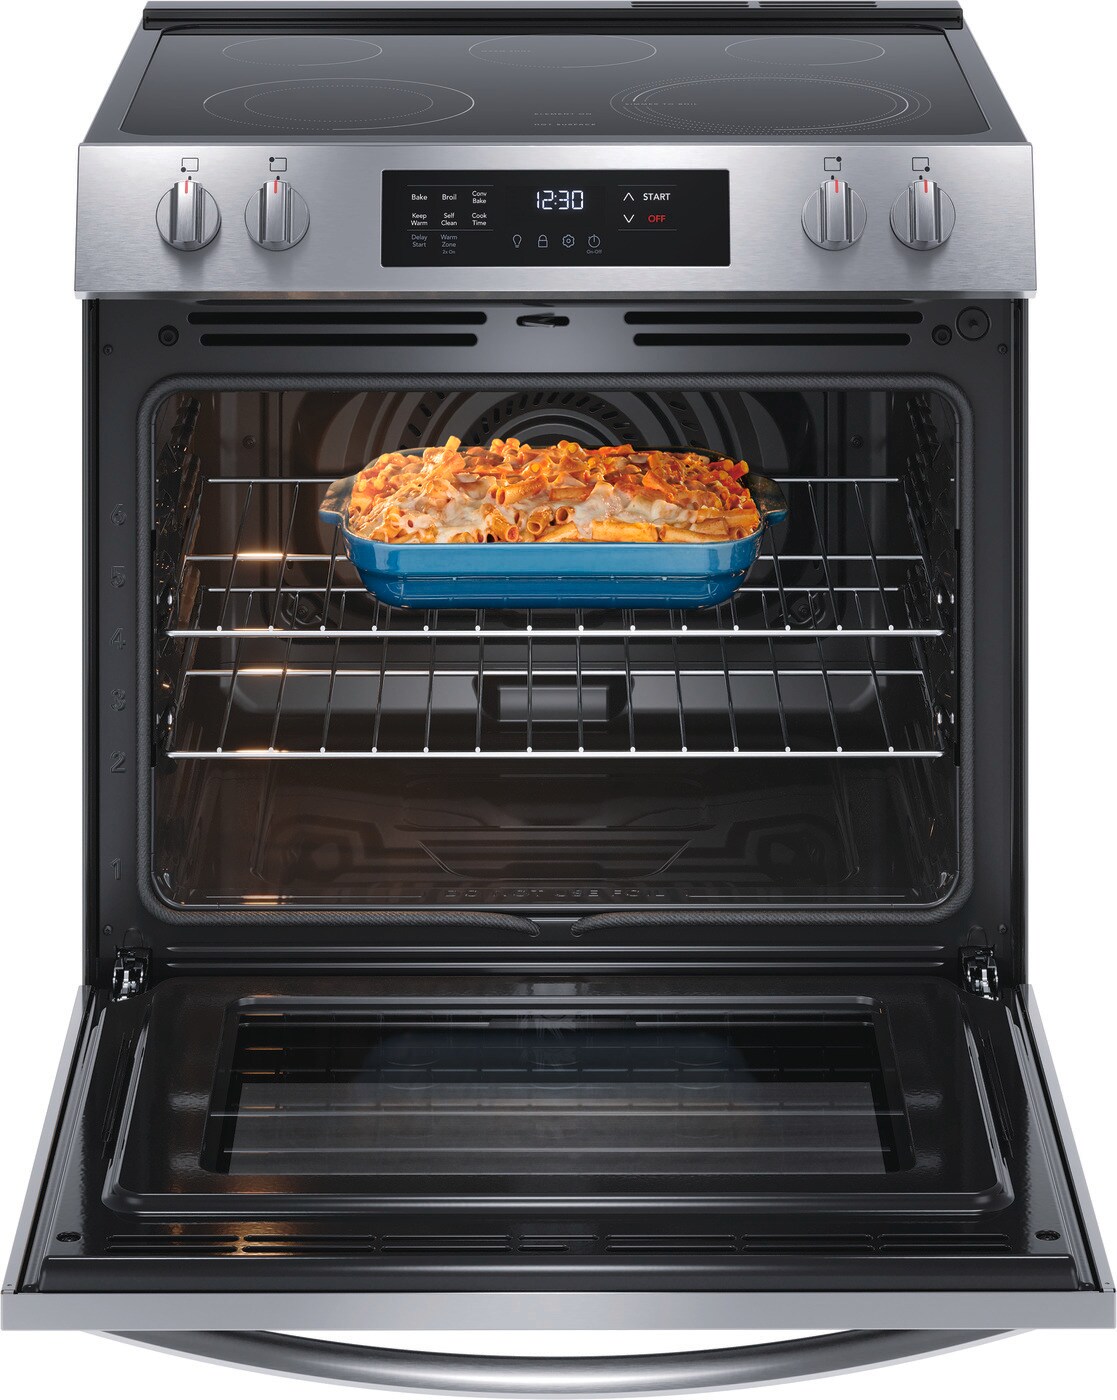 Frigidaire 30 in. 5.3 cu. ft. Convection Oven Freestanding